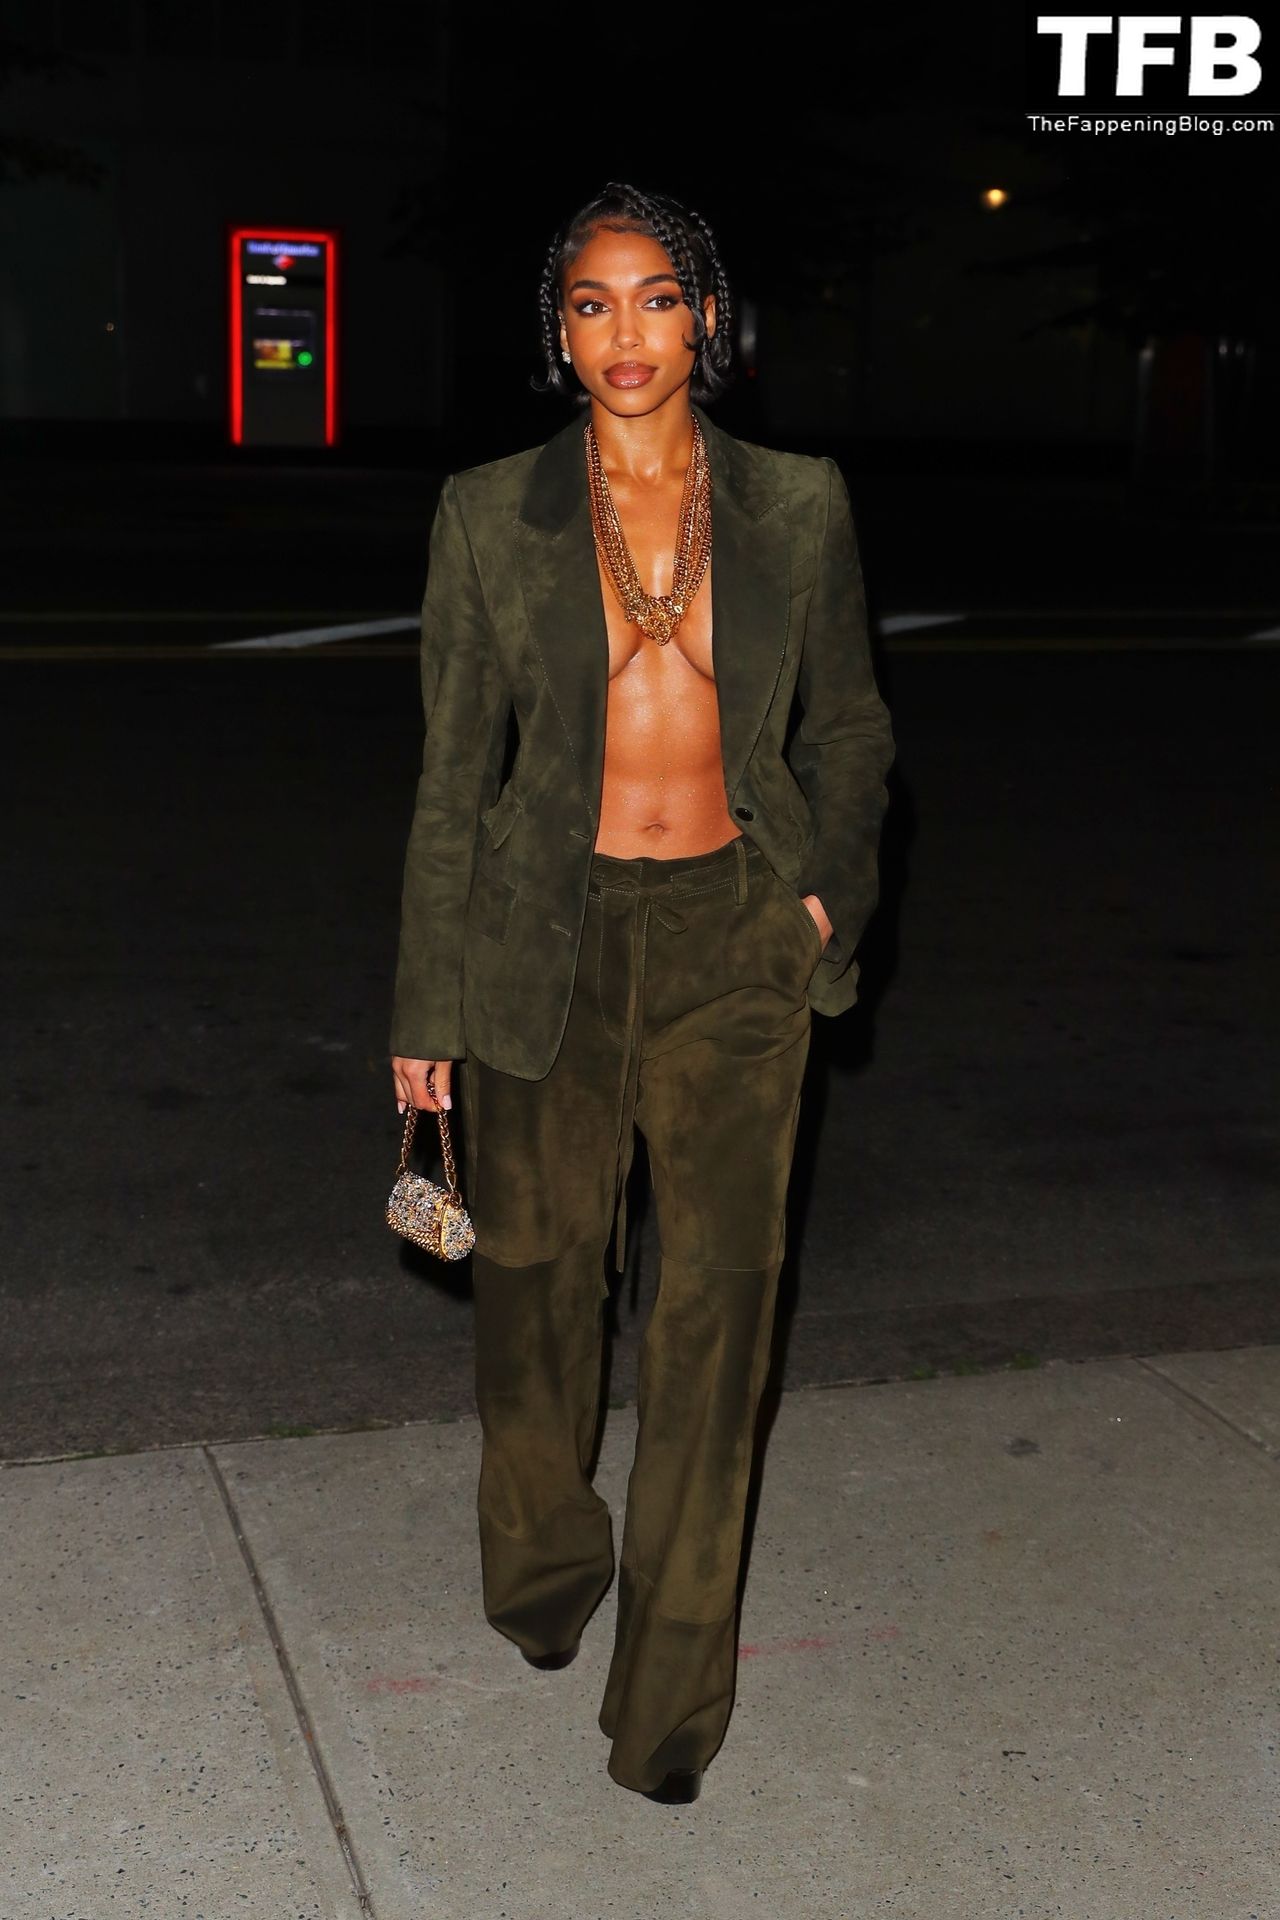 Lori Harvey Sexy The Fappening Blog 29 - Lori Harvey Shows Off Her Tits at the Tom Ford Fashion Show (38 Photos)